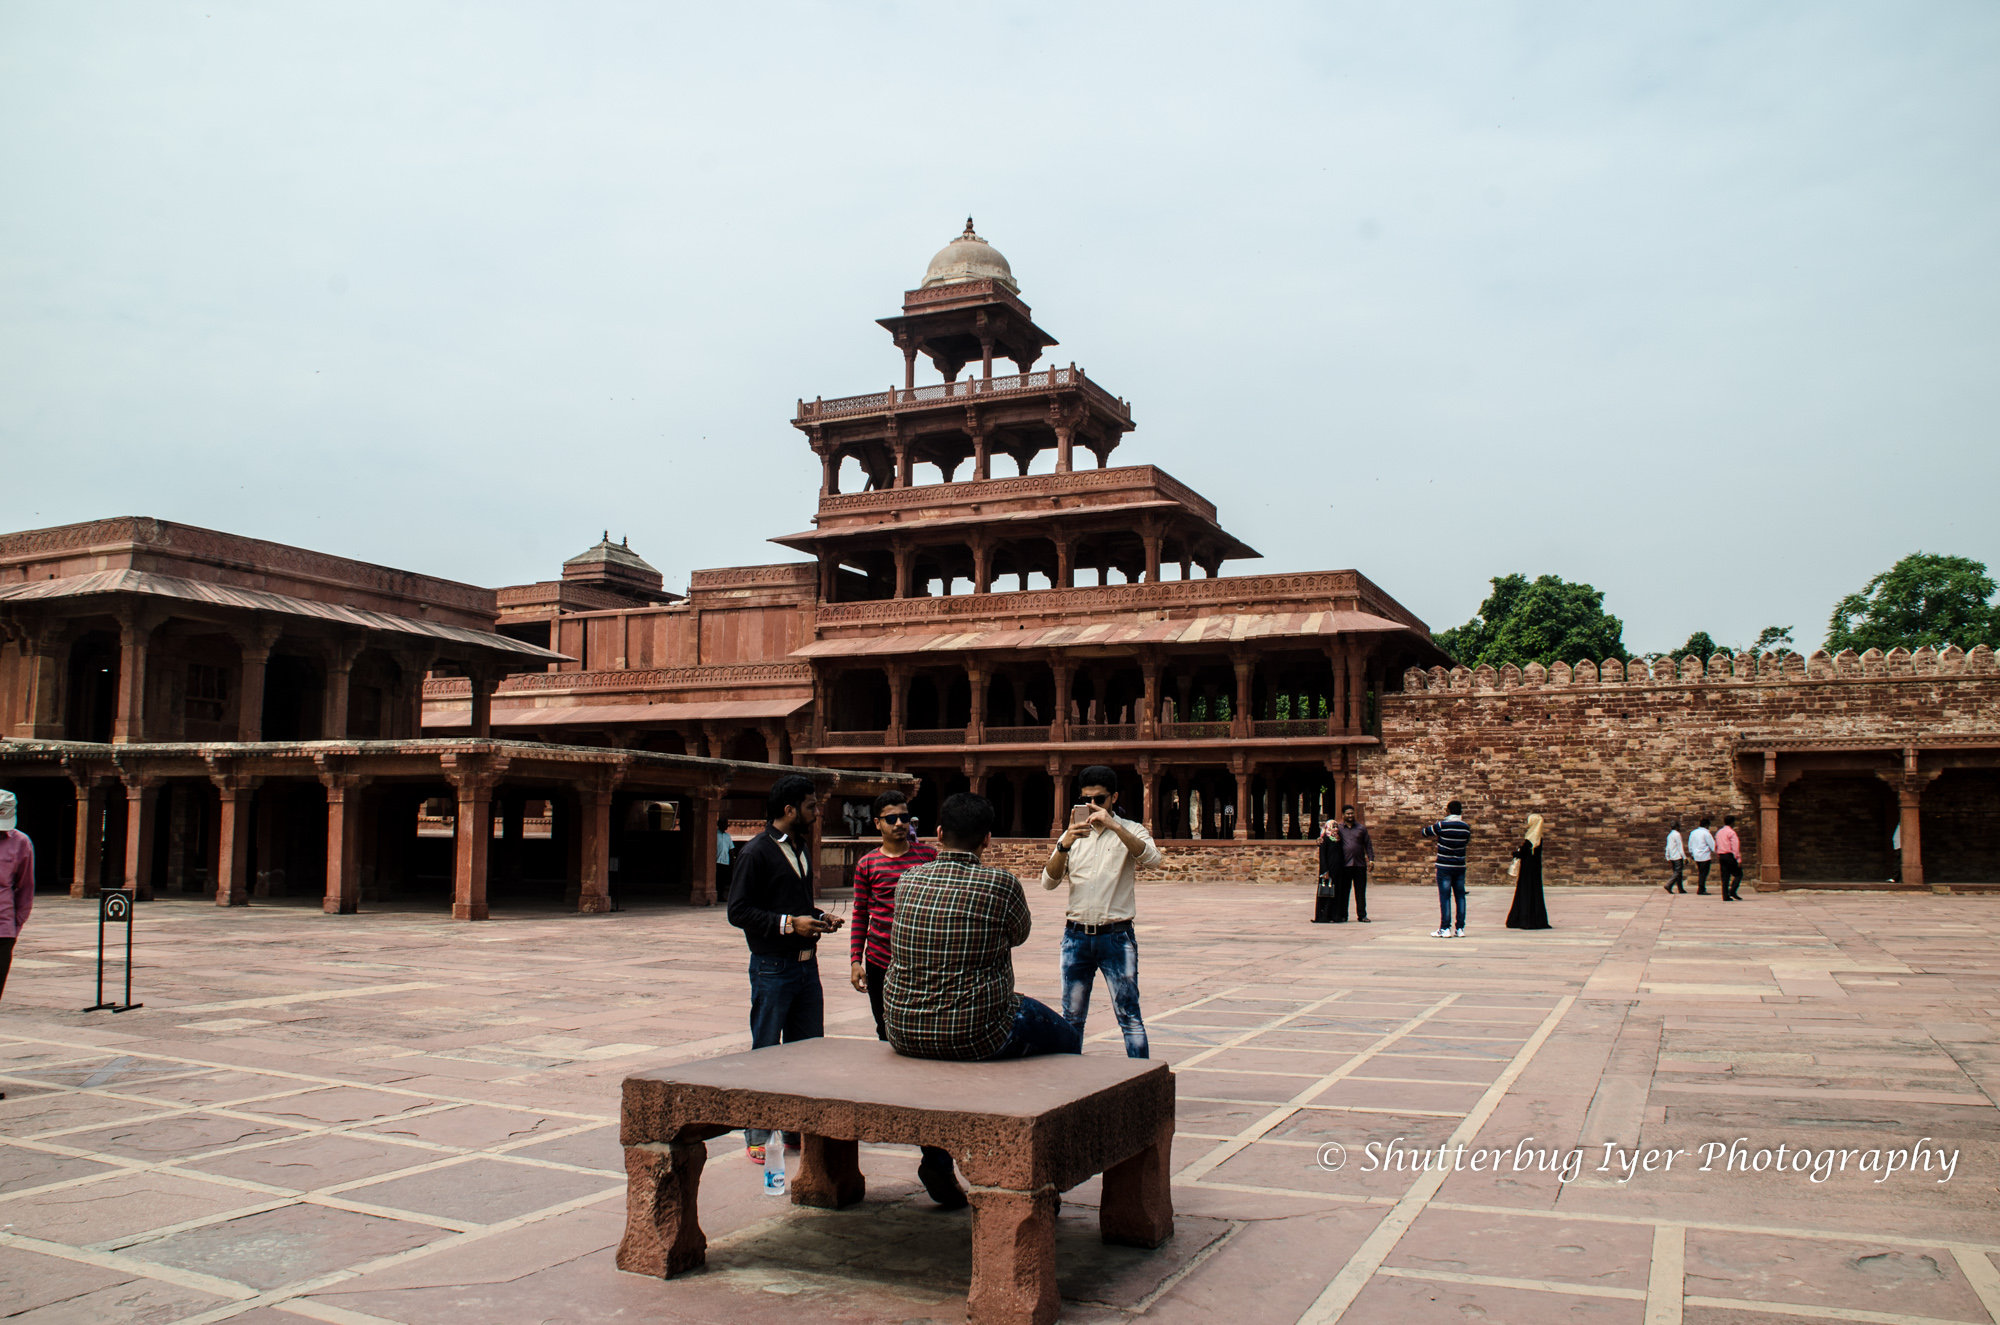 Chaupad squares at Fatehpur Sikri in front of Panch mahal